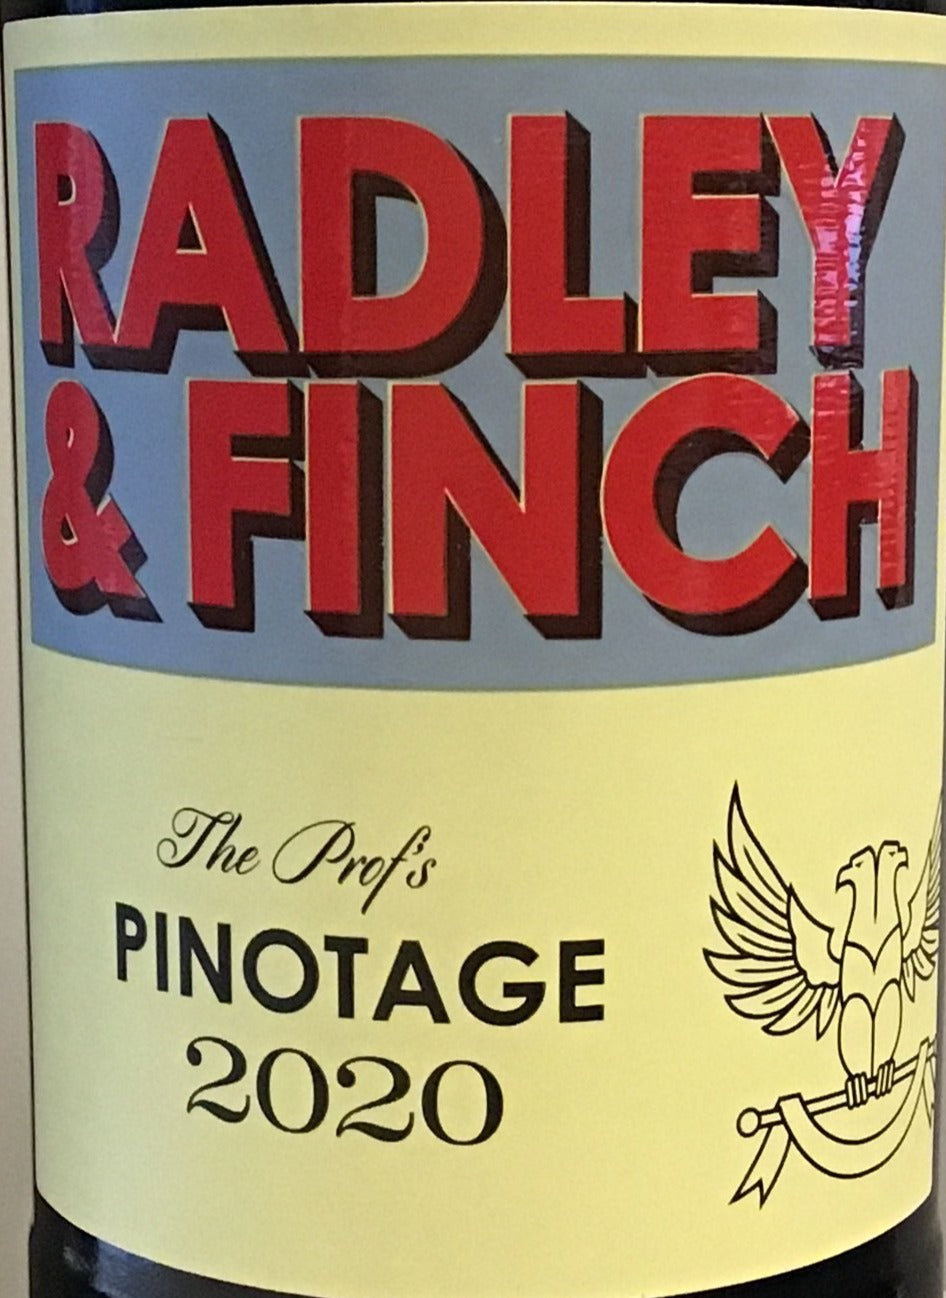 Radley & Finch 'The Profs' - Pinotage